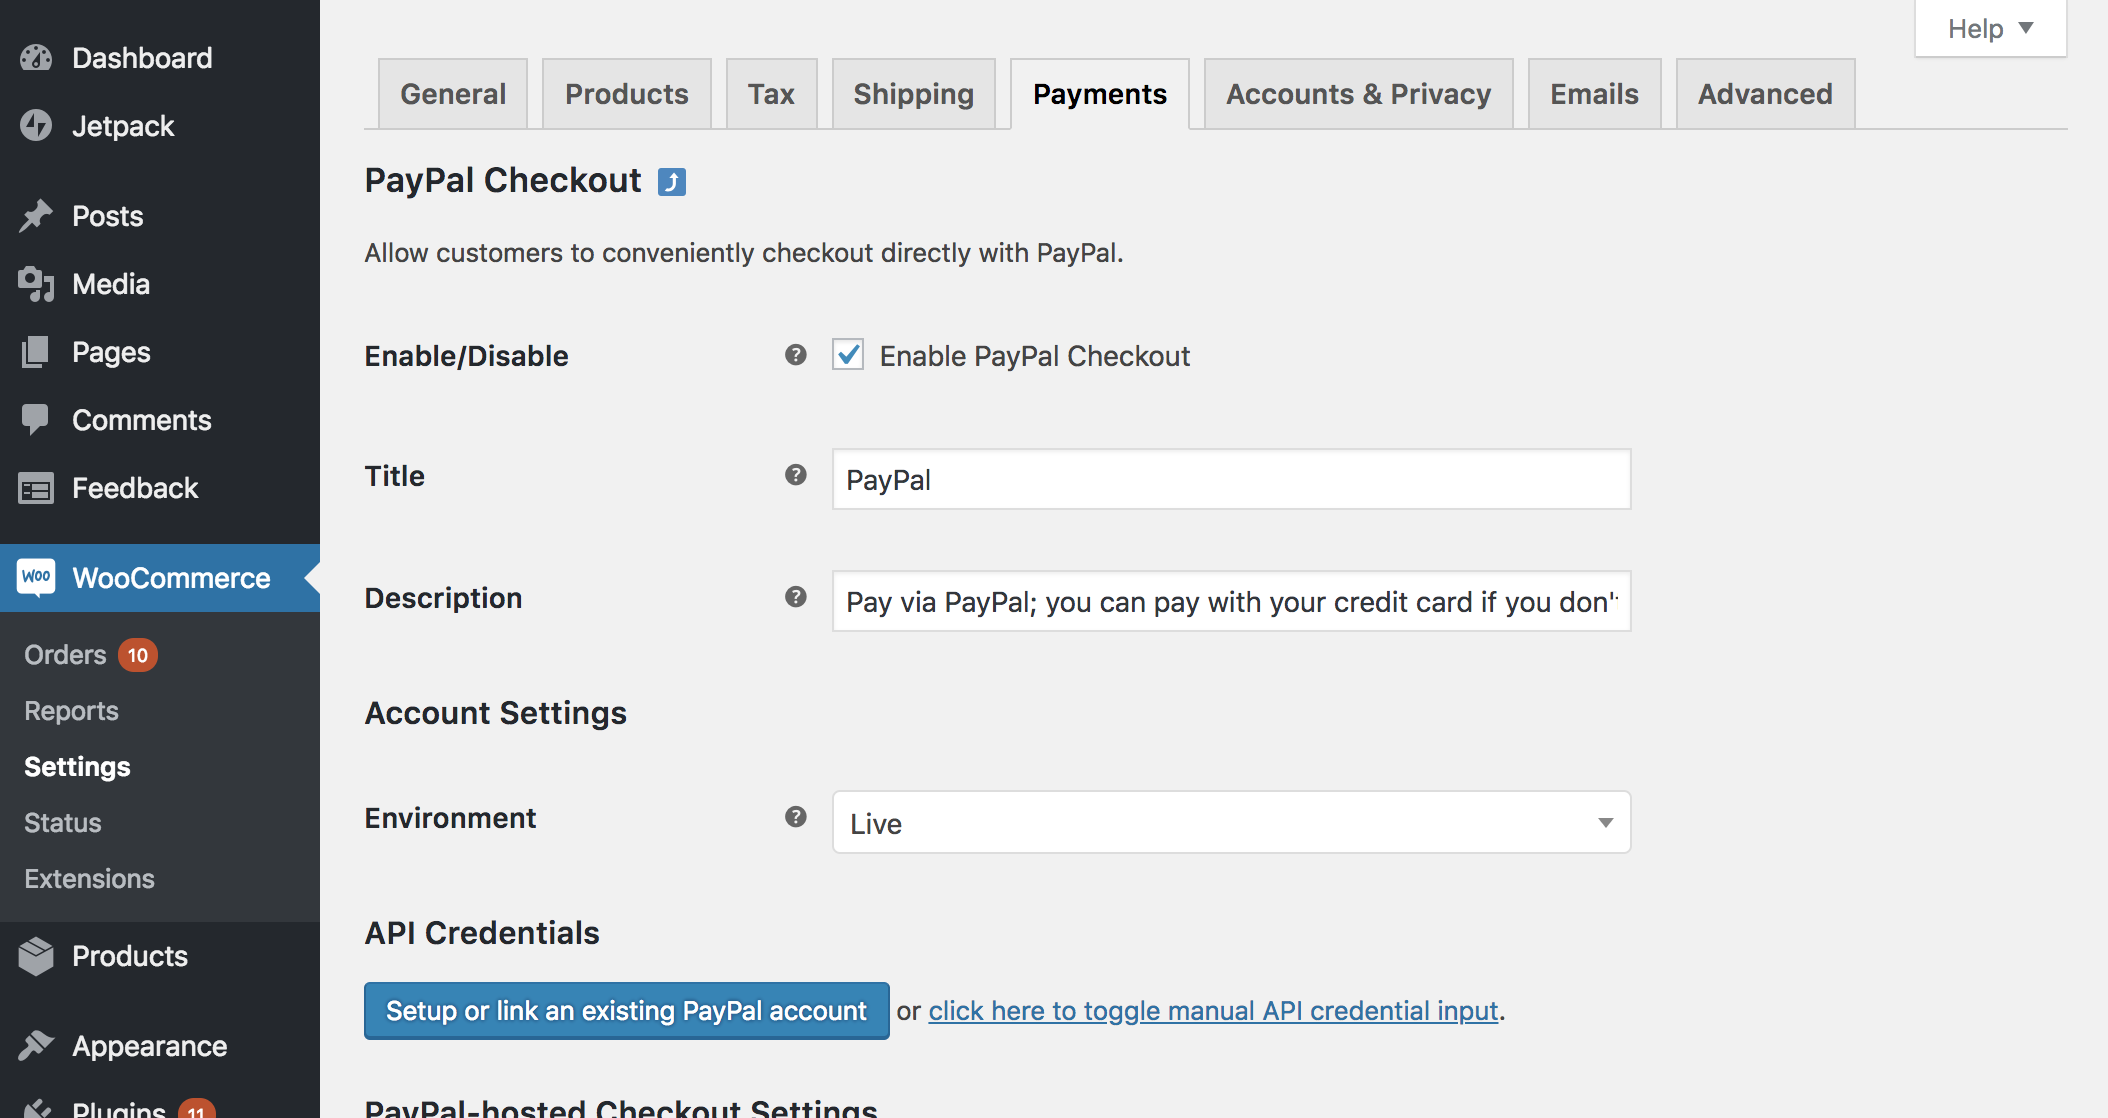 Click the "Setup or link an existing PayPal account" button. If you want to test before going live, you can switch the Environment, above the button, to Sandbox.